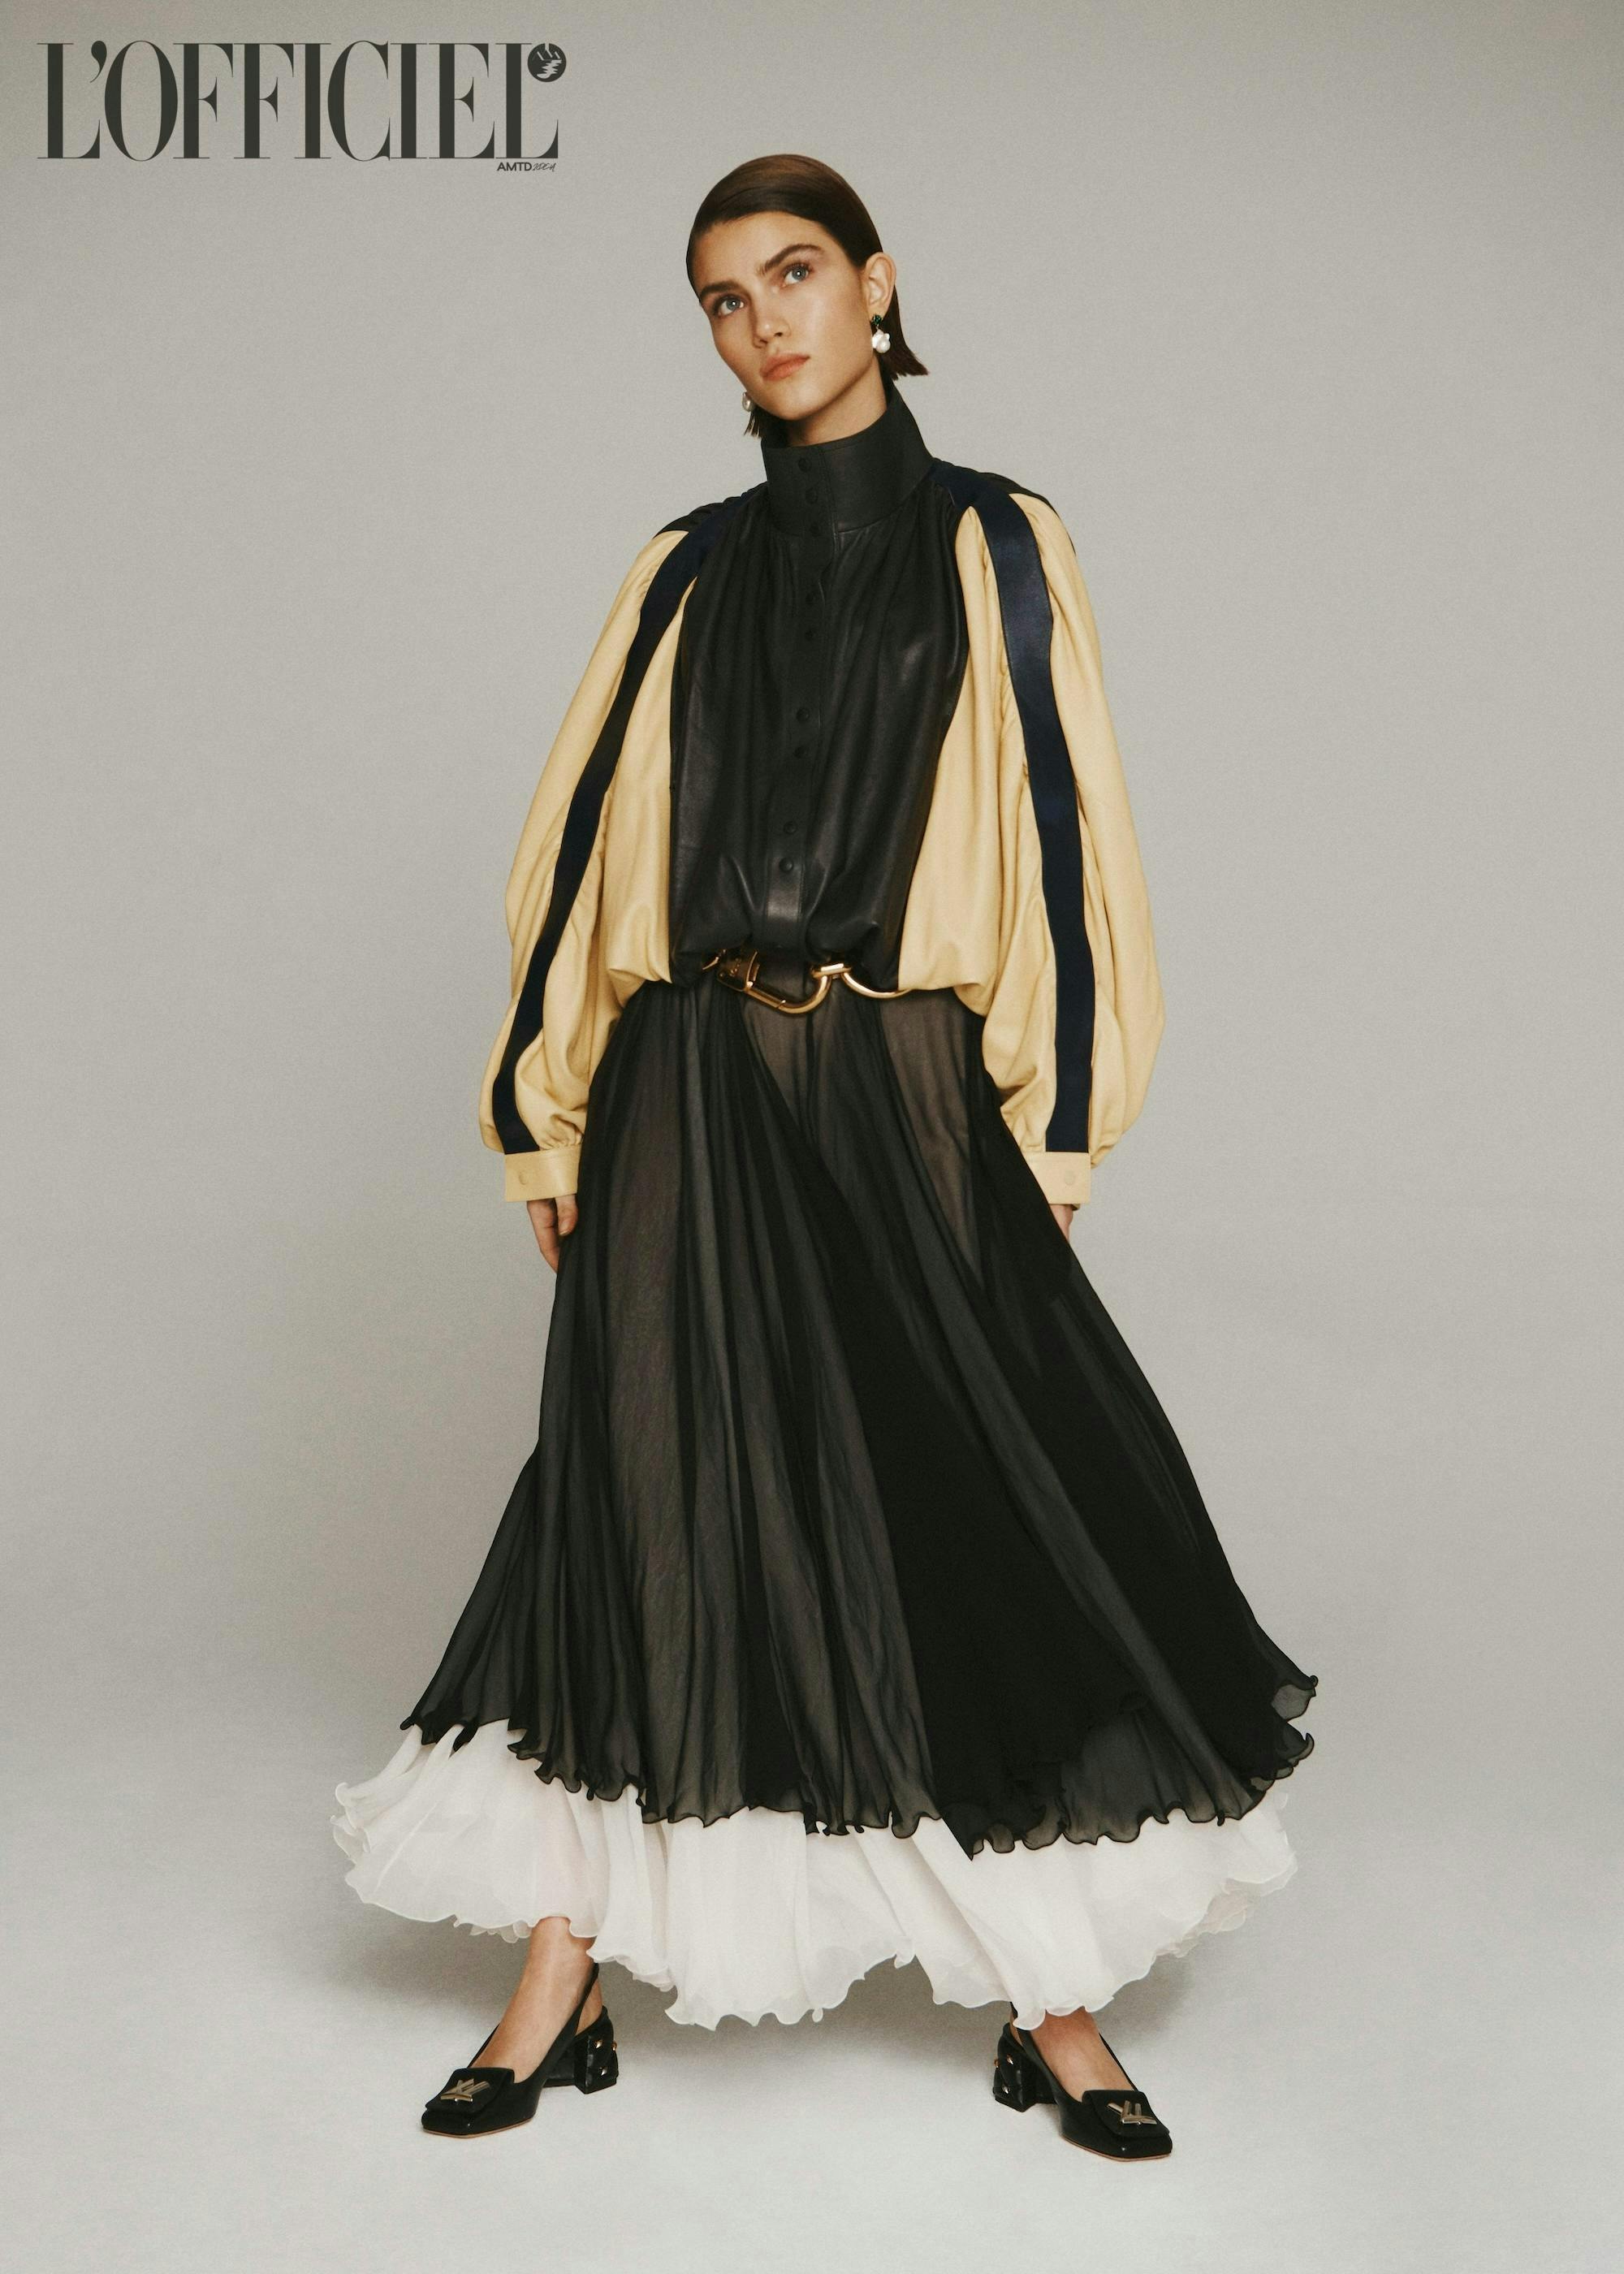 A model with a tan and black loose top, a long frilly black skirt with a white hem, black heels, a black and gold belt, and gold earrings.